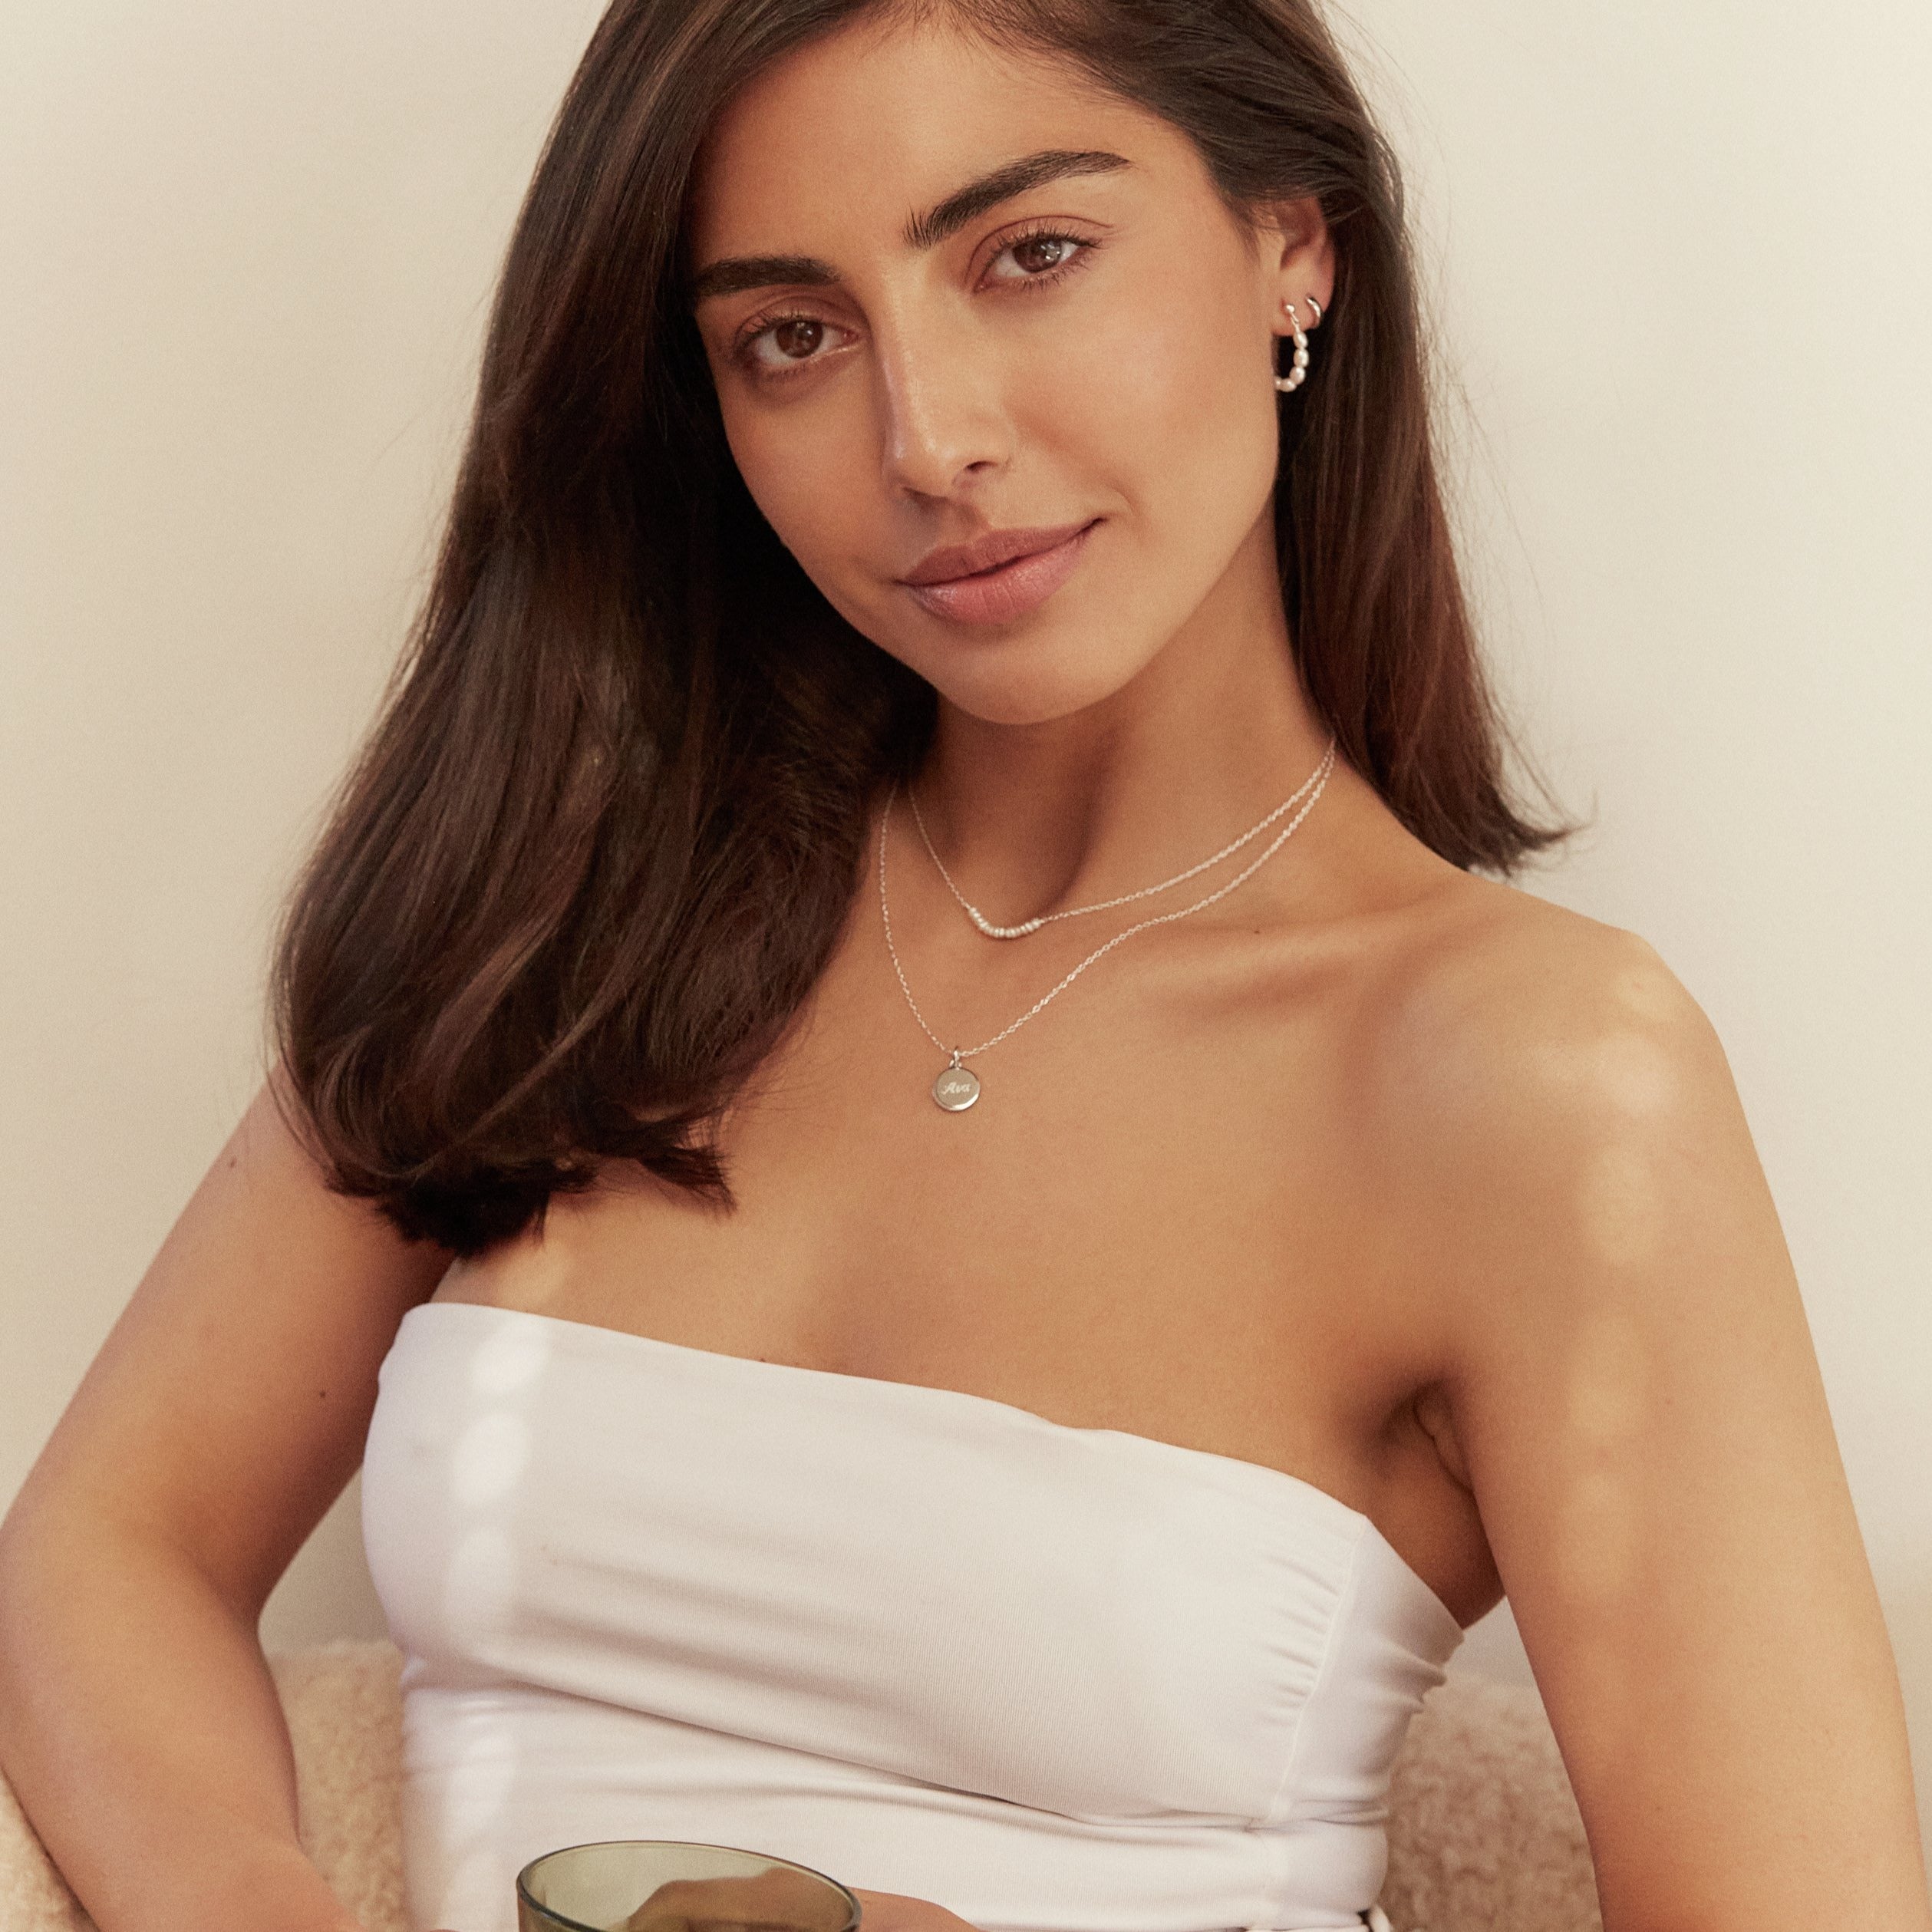 A woman wearing a silver small round engraved disc necklace with the name 'Ava' engraved and a silver pearl cluster choker around her neck and a white strapless top on her body